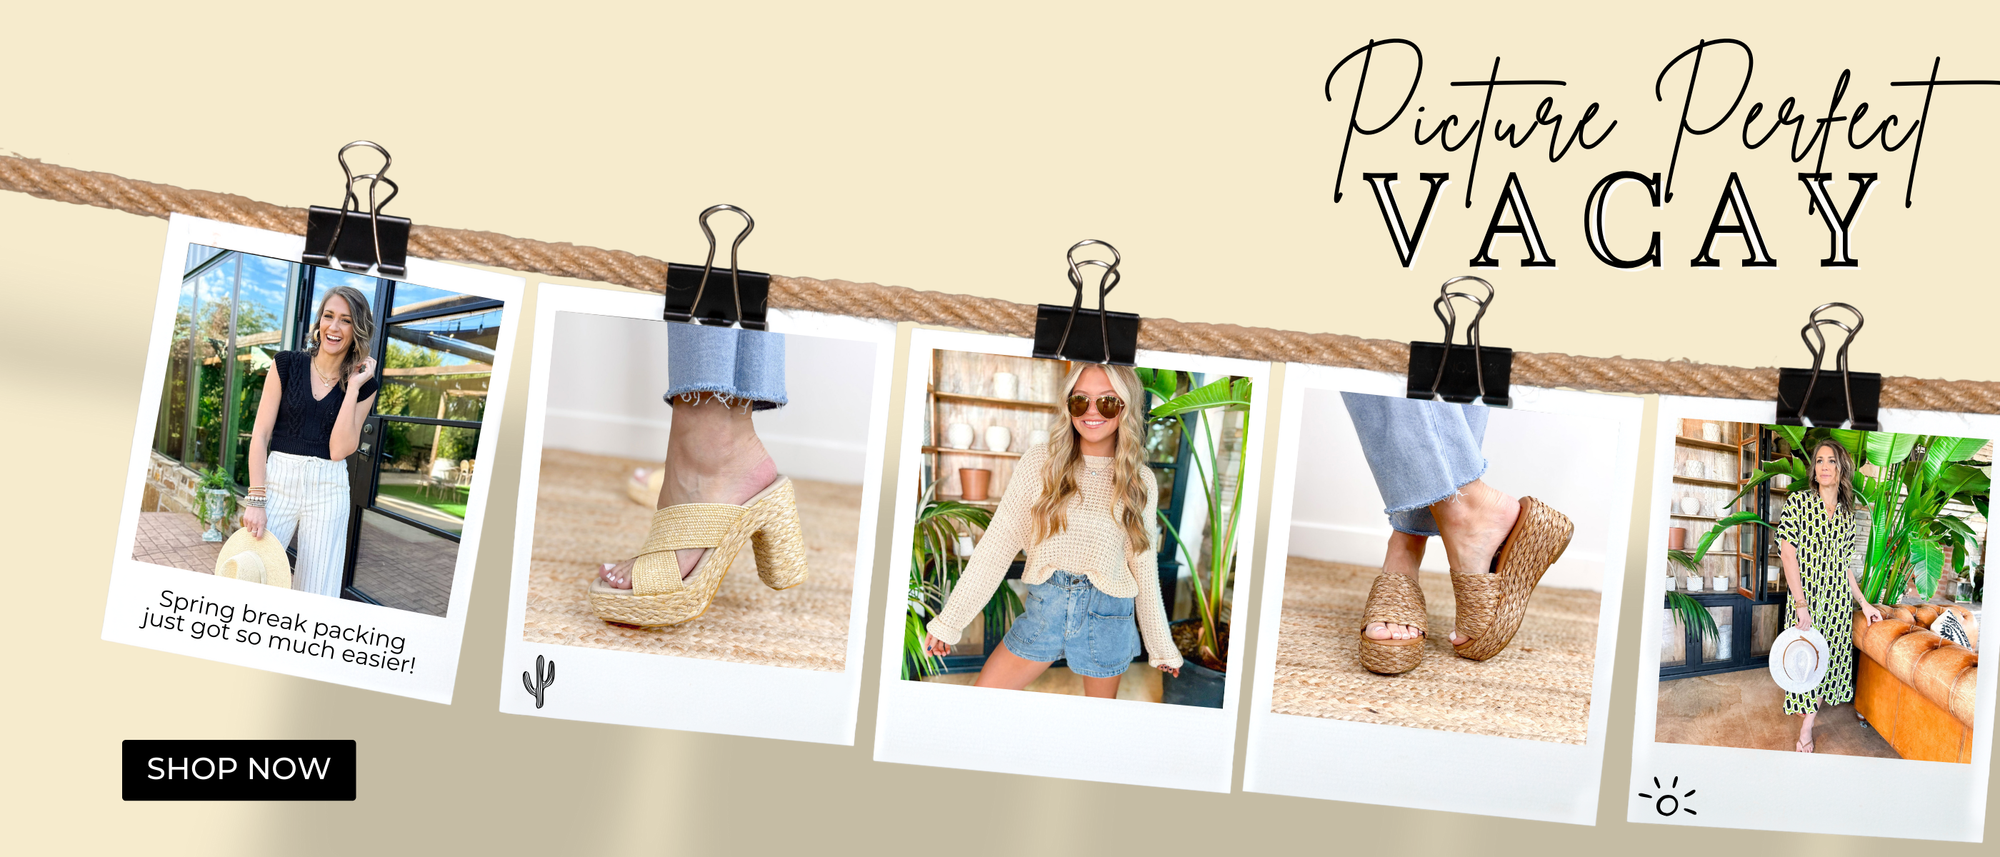 Picture Perfect Vacay. Shop the latest collection inspired by spring break with styles such as linen pants, light-weight loose knit sweaters, breezy dresses and platform raffia resort ready shoes.